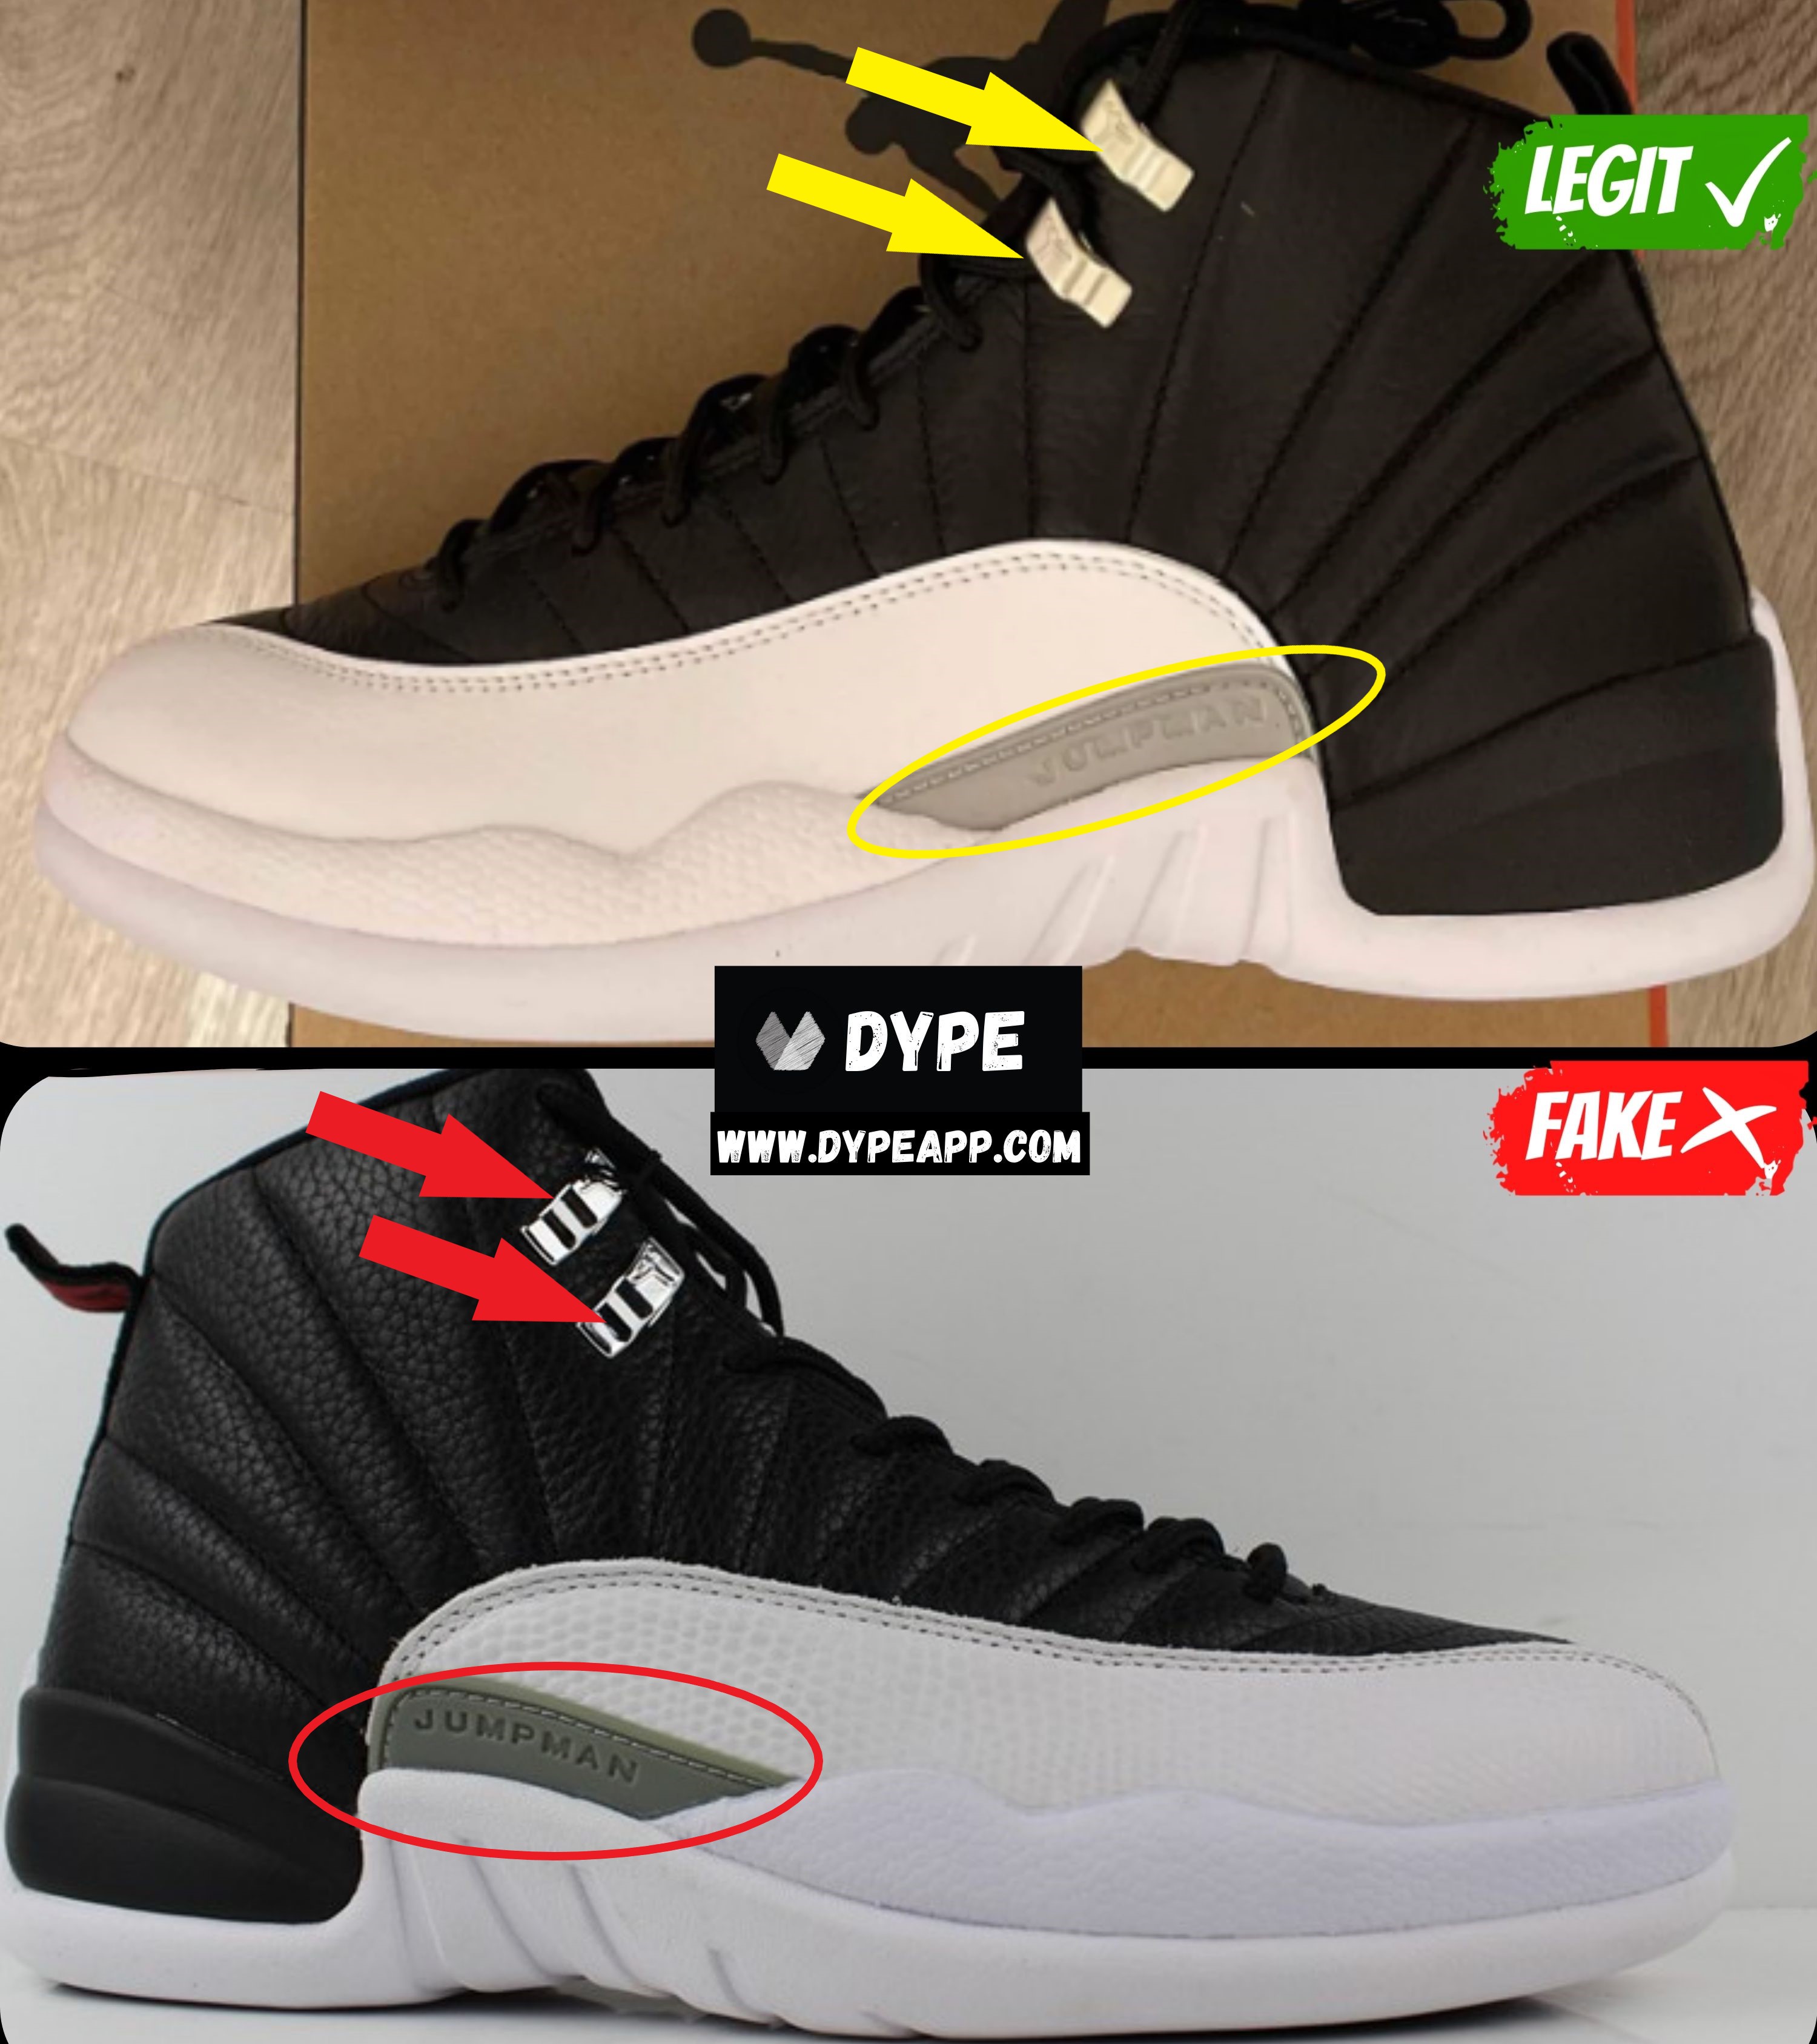 how to tell if the jordan 12s are fake